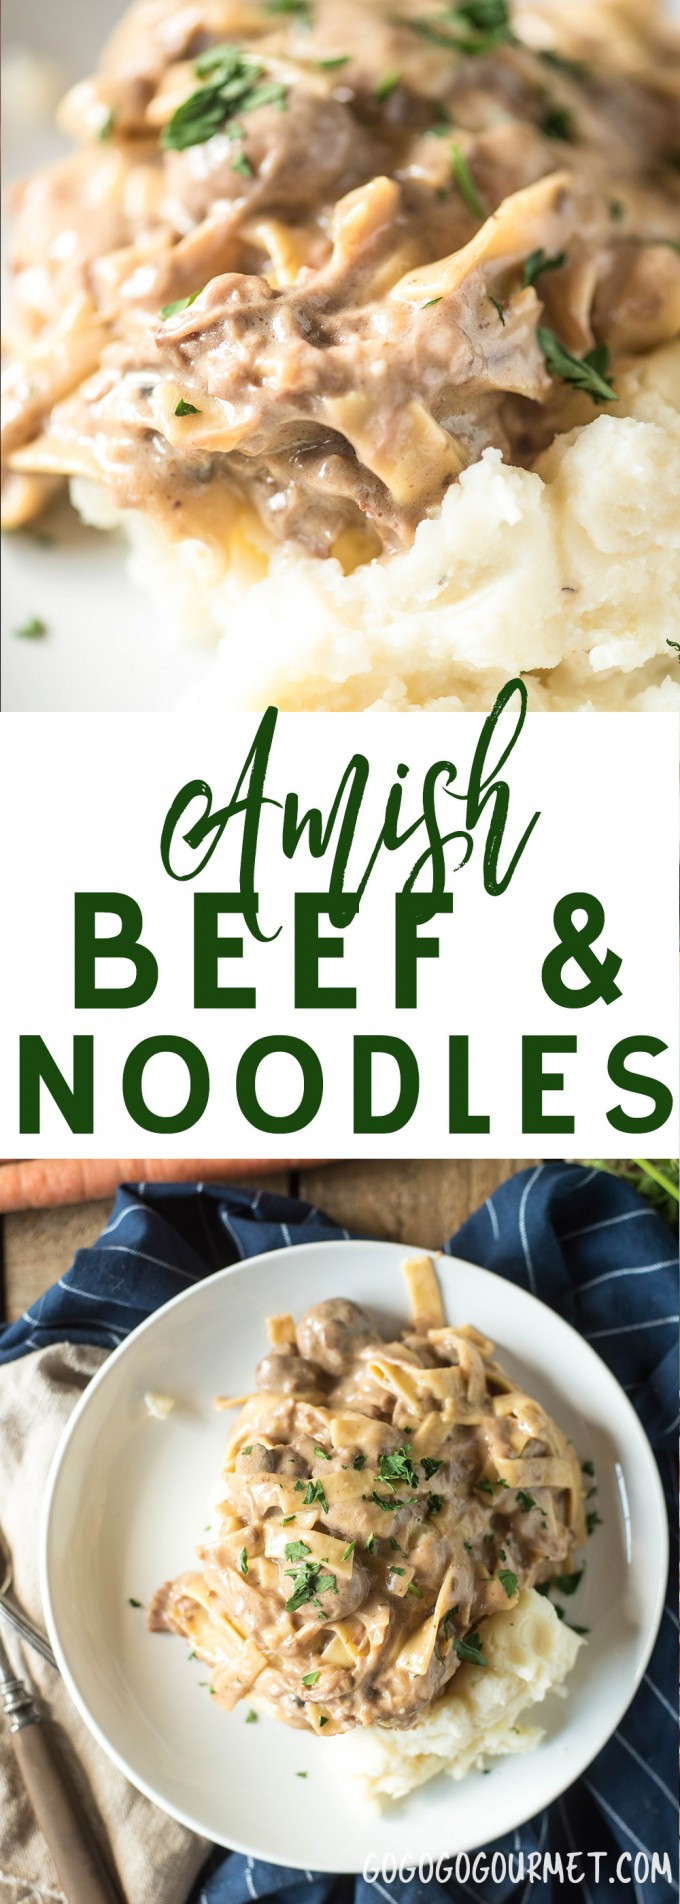 Amish Beef And Noodles
 Slow Cooker Amish Beef and Noodles Go Go Go Gourmet